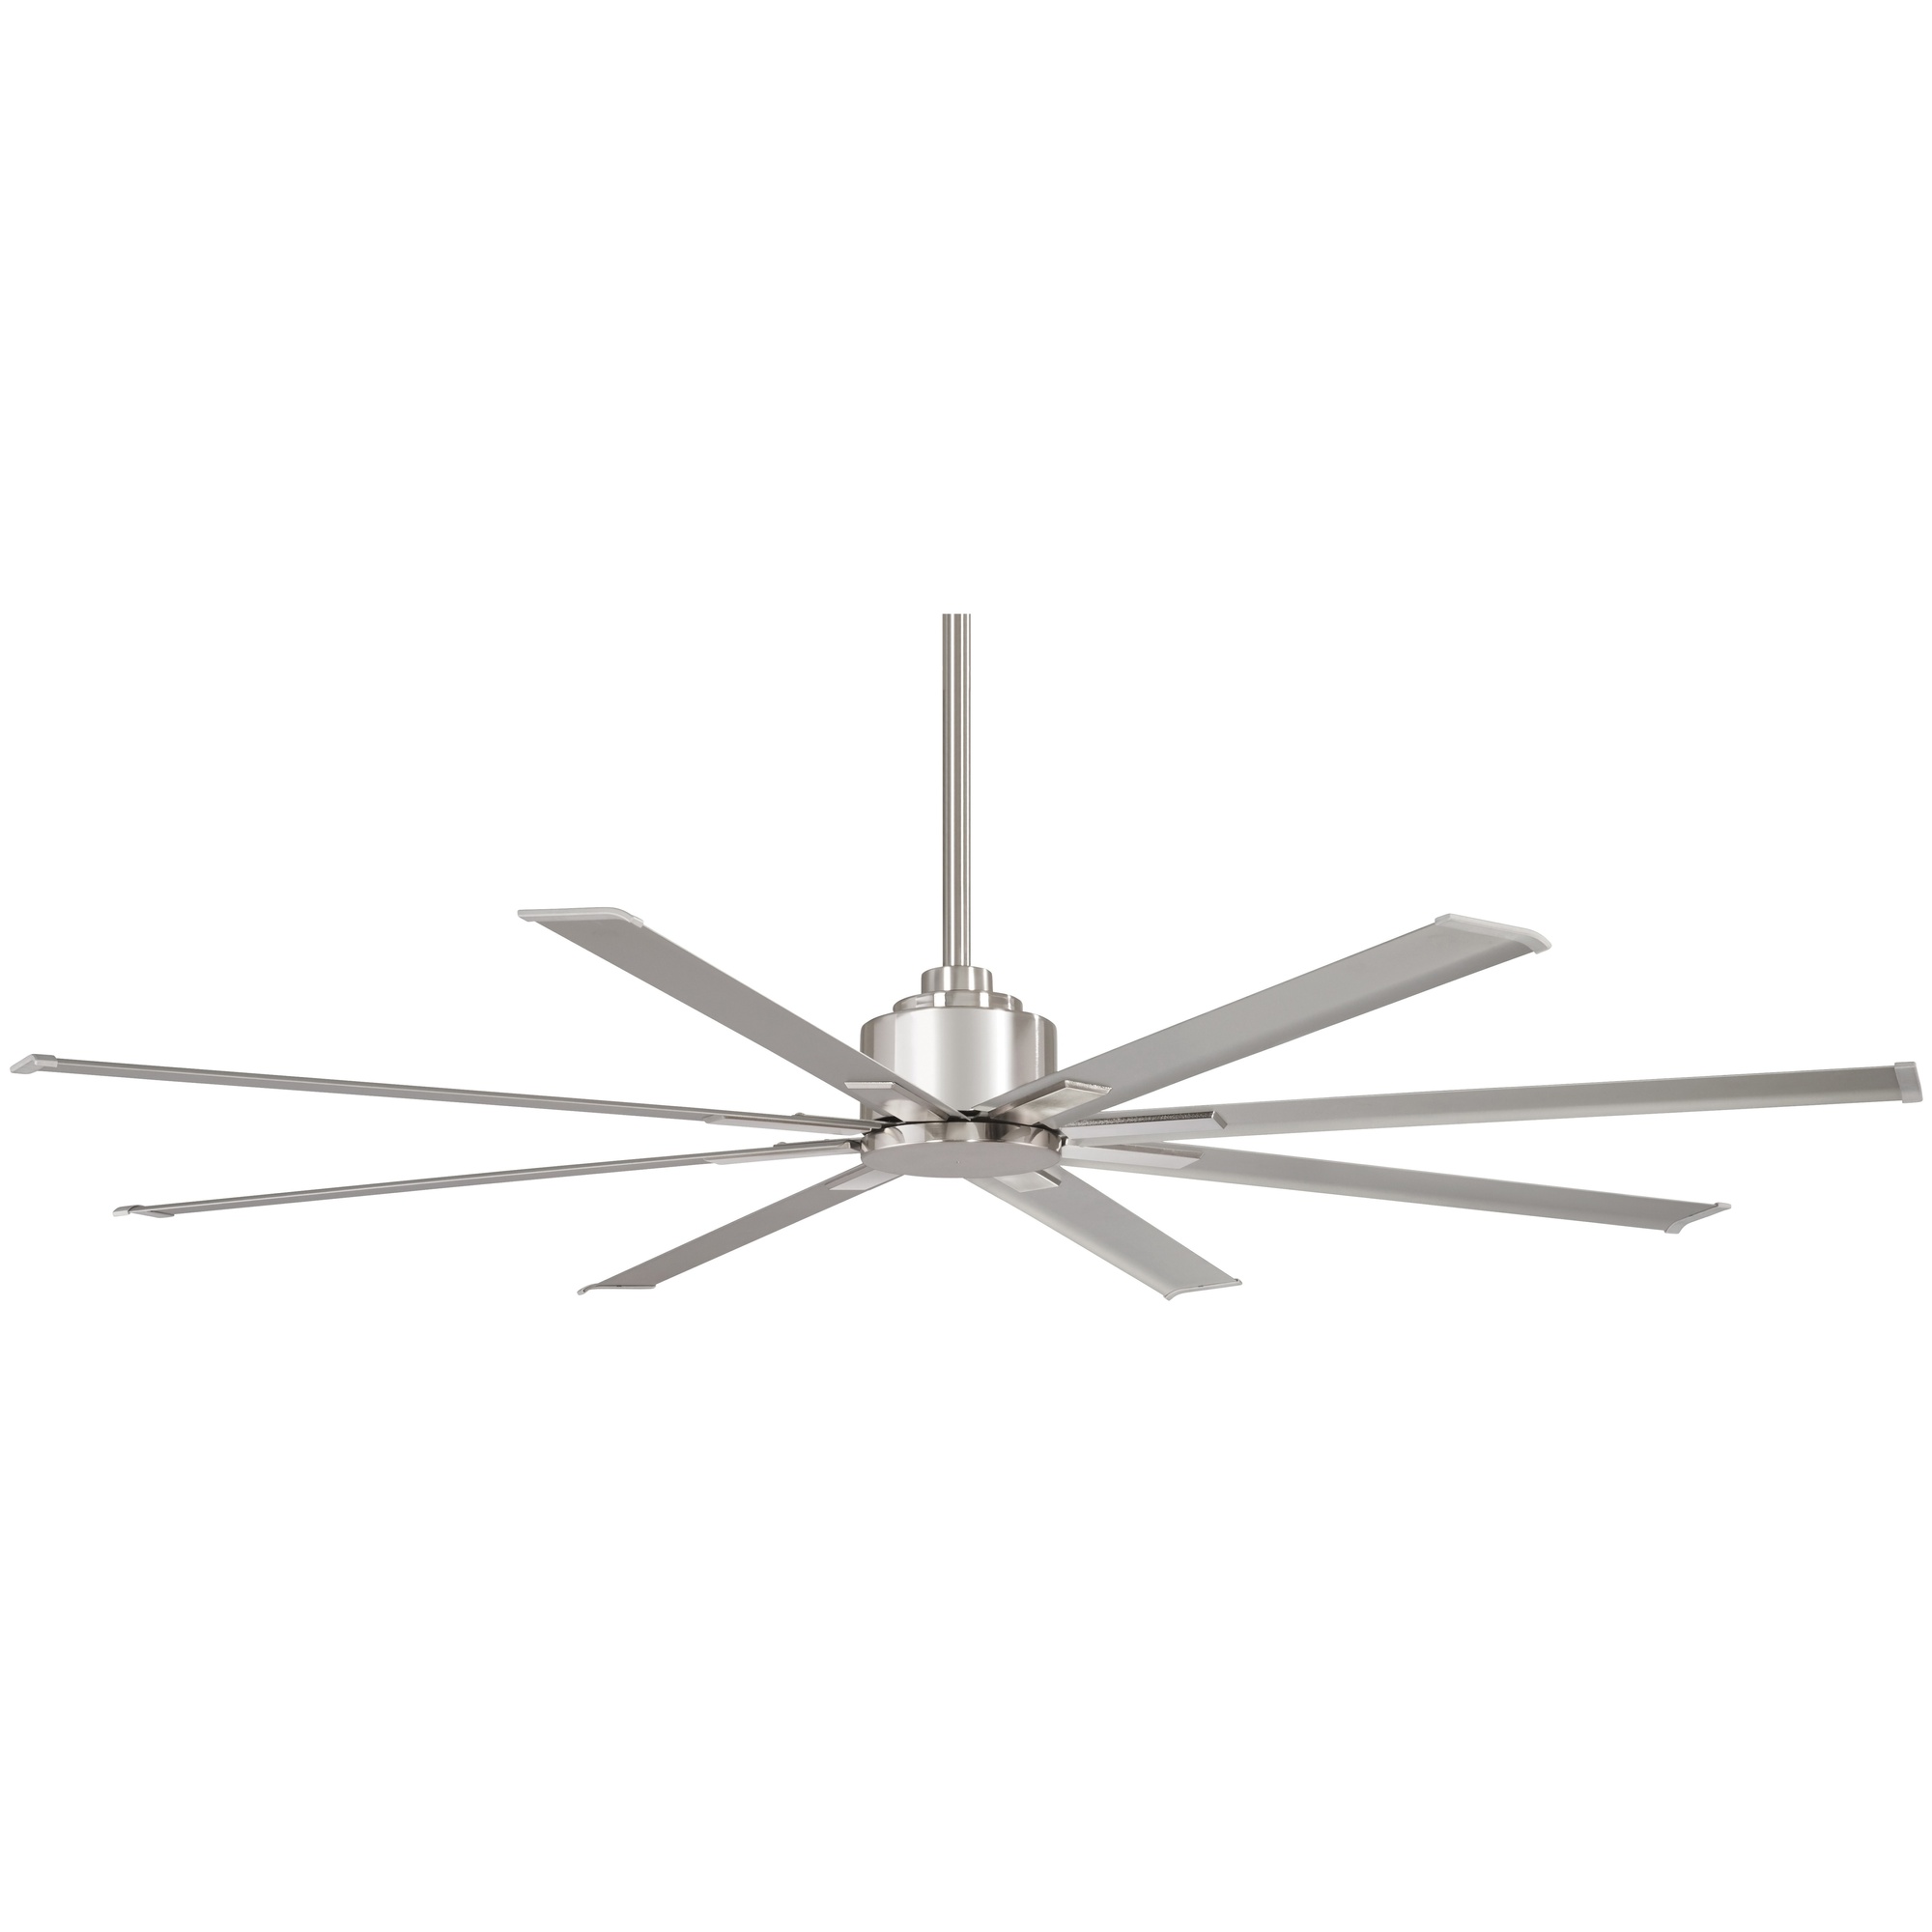 Minka Aire F886 65 Bnw Ceiling Fan 65 Inch 8 Blade 6 Speed Brushed